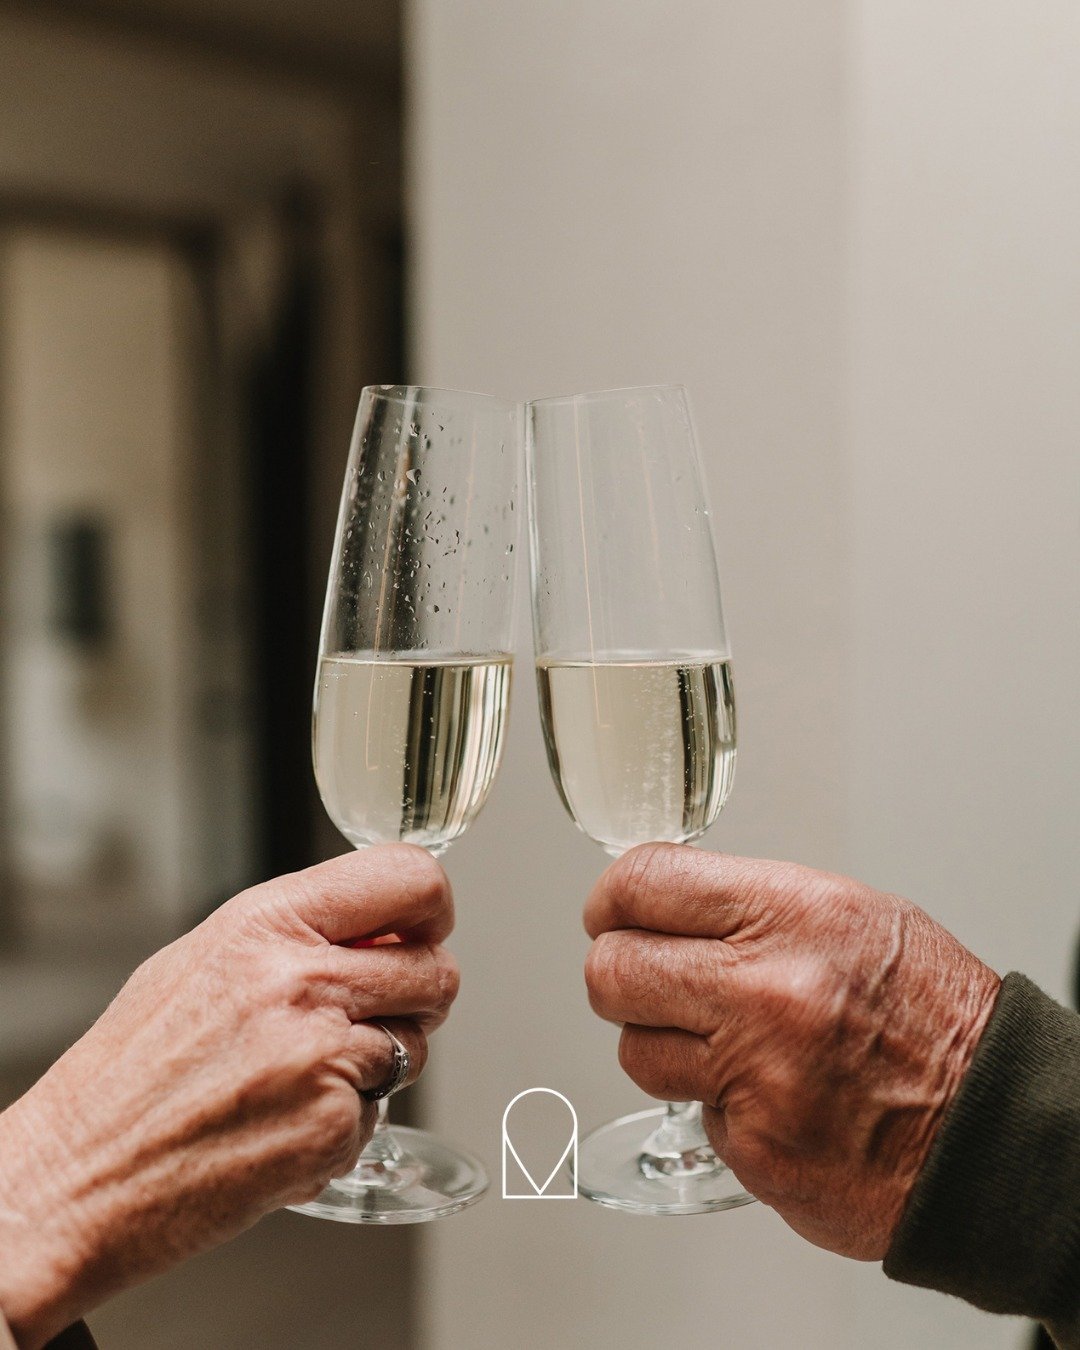 Toast to unforgettable moments 🥂

Finding your dream home in the Netherlands should be stress-free. Let us take care of all your moving needs so you can focus on what truly matters - work and family. With our exceptional care and support, settling i